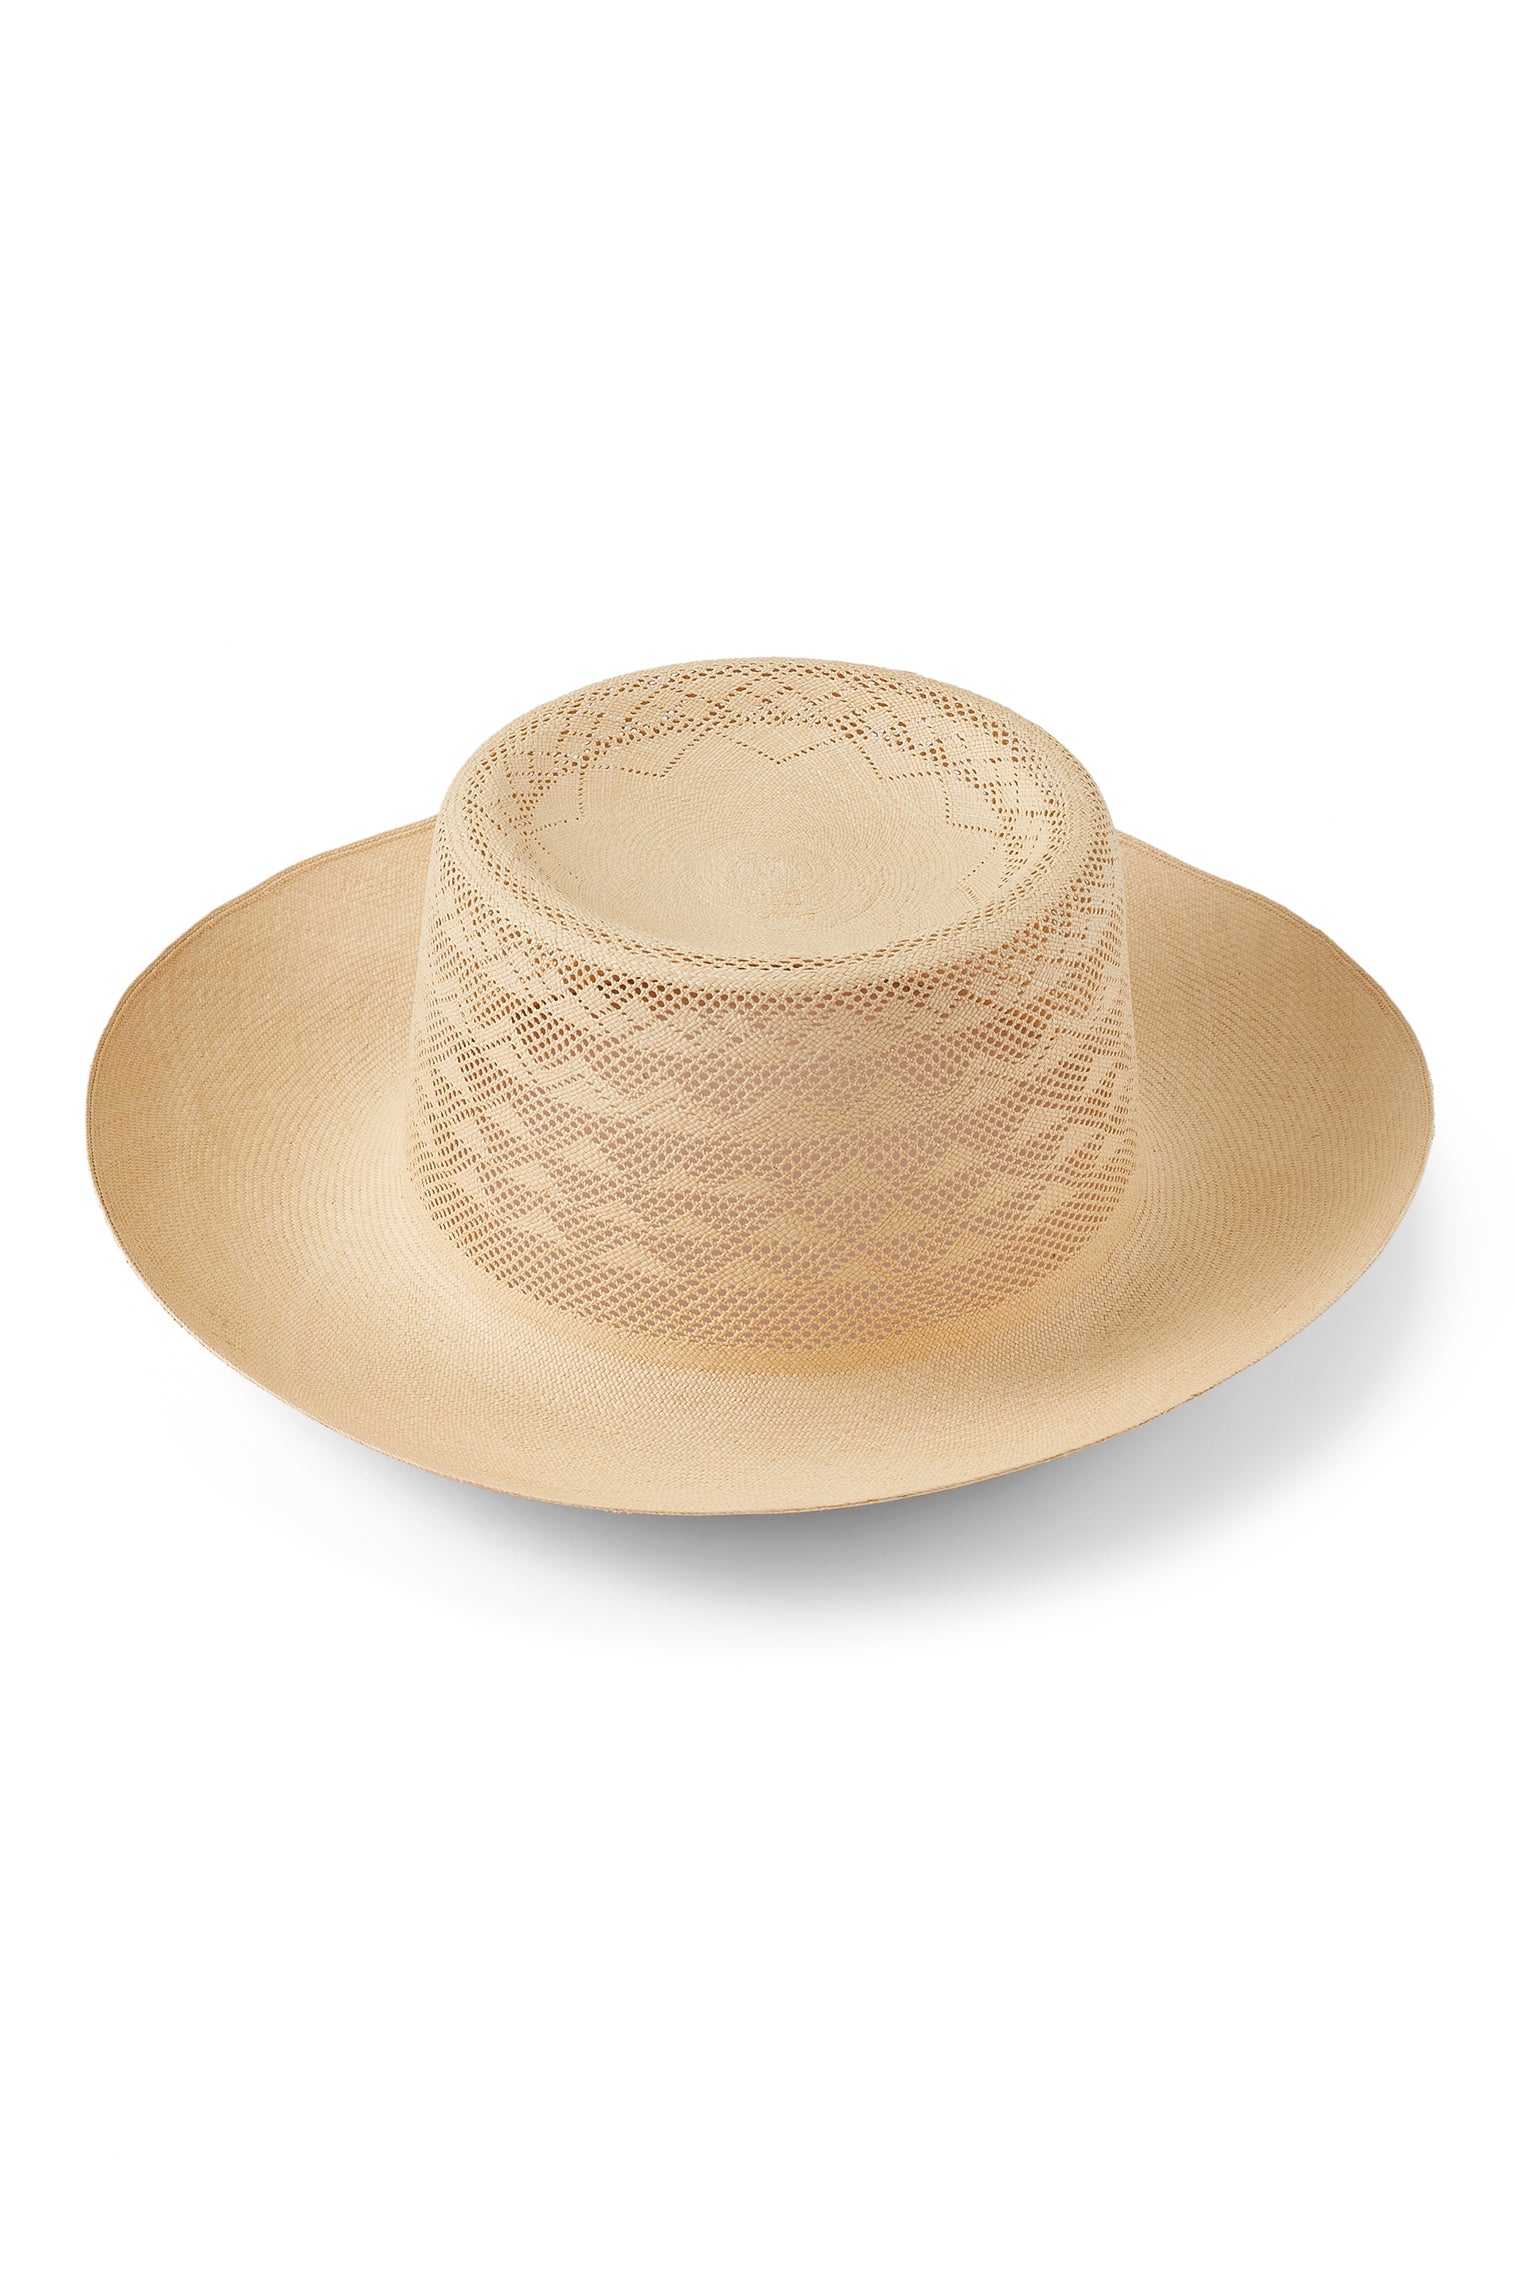 Flora Woven Panama - The Bespoke Embroidered Panama Hat Collection - Lock & Co. Hatters London UK